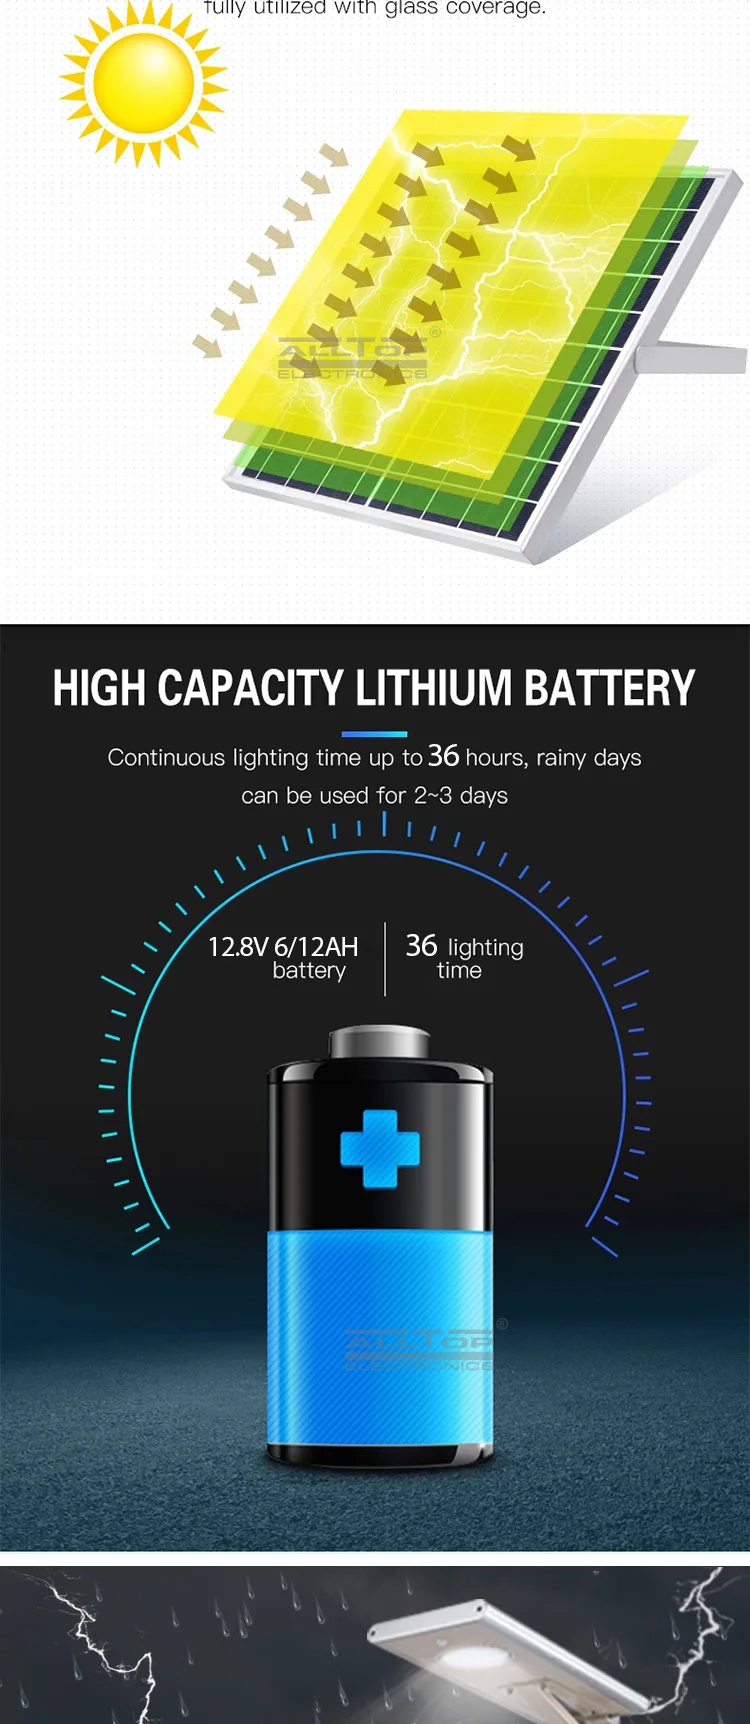 ALLTOP lithium ion solar battery functional wholesale-11